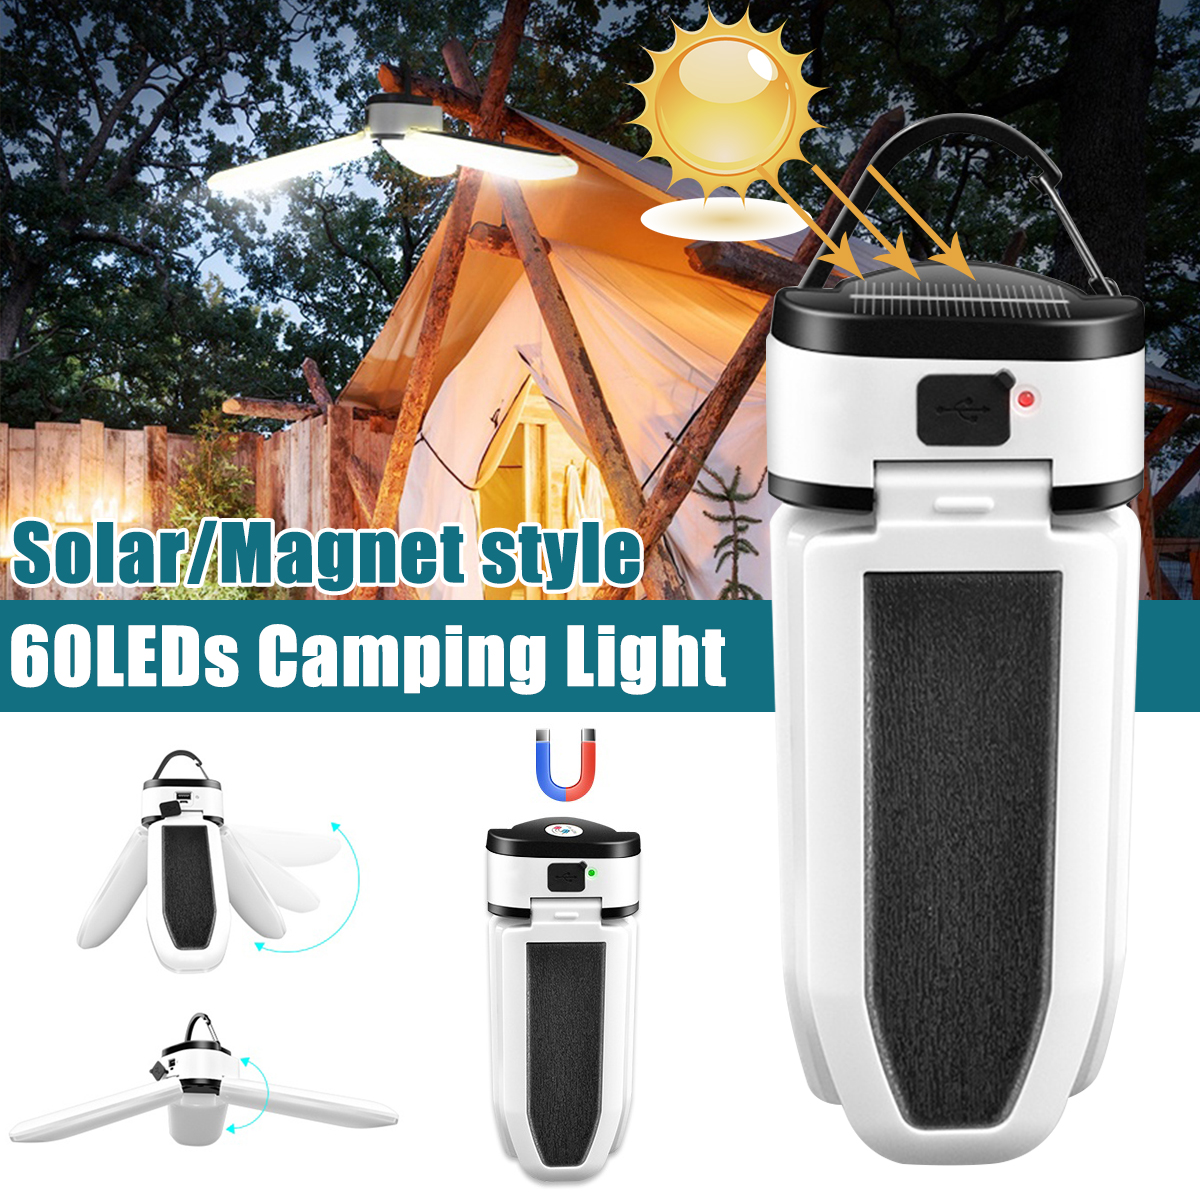 Rechargeable-Solar-Powered-LED-3-leaf-Light-Lamp-5-Modes-Emergency-Light-Camping-1789991-1